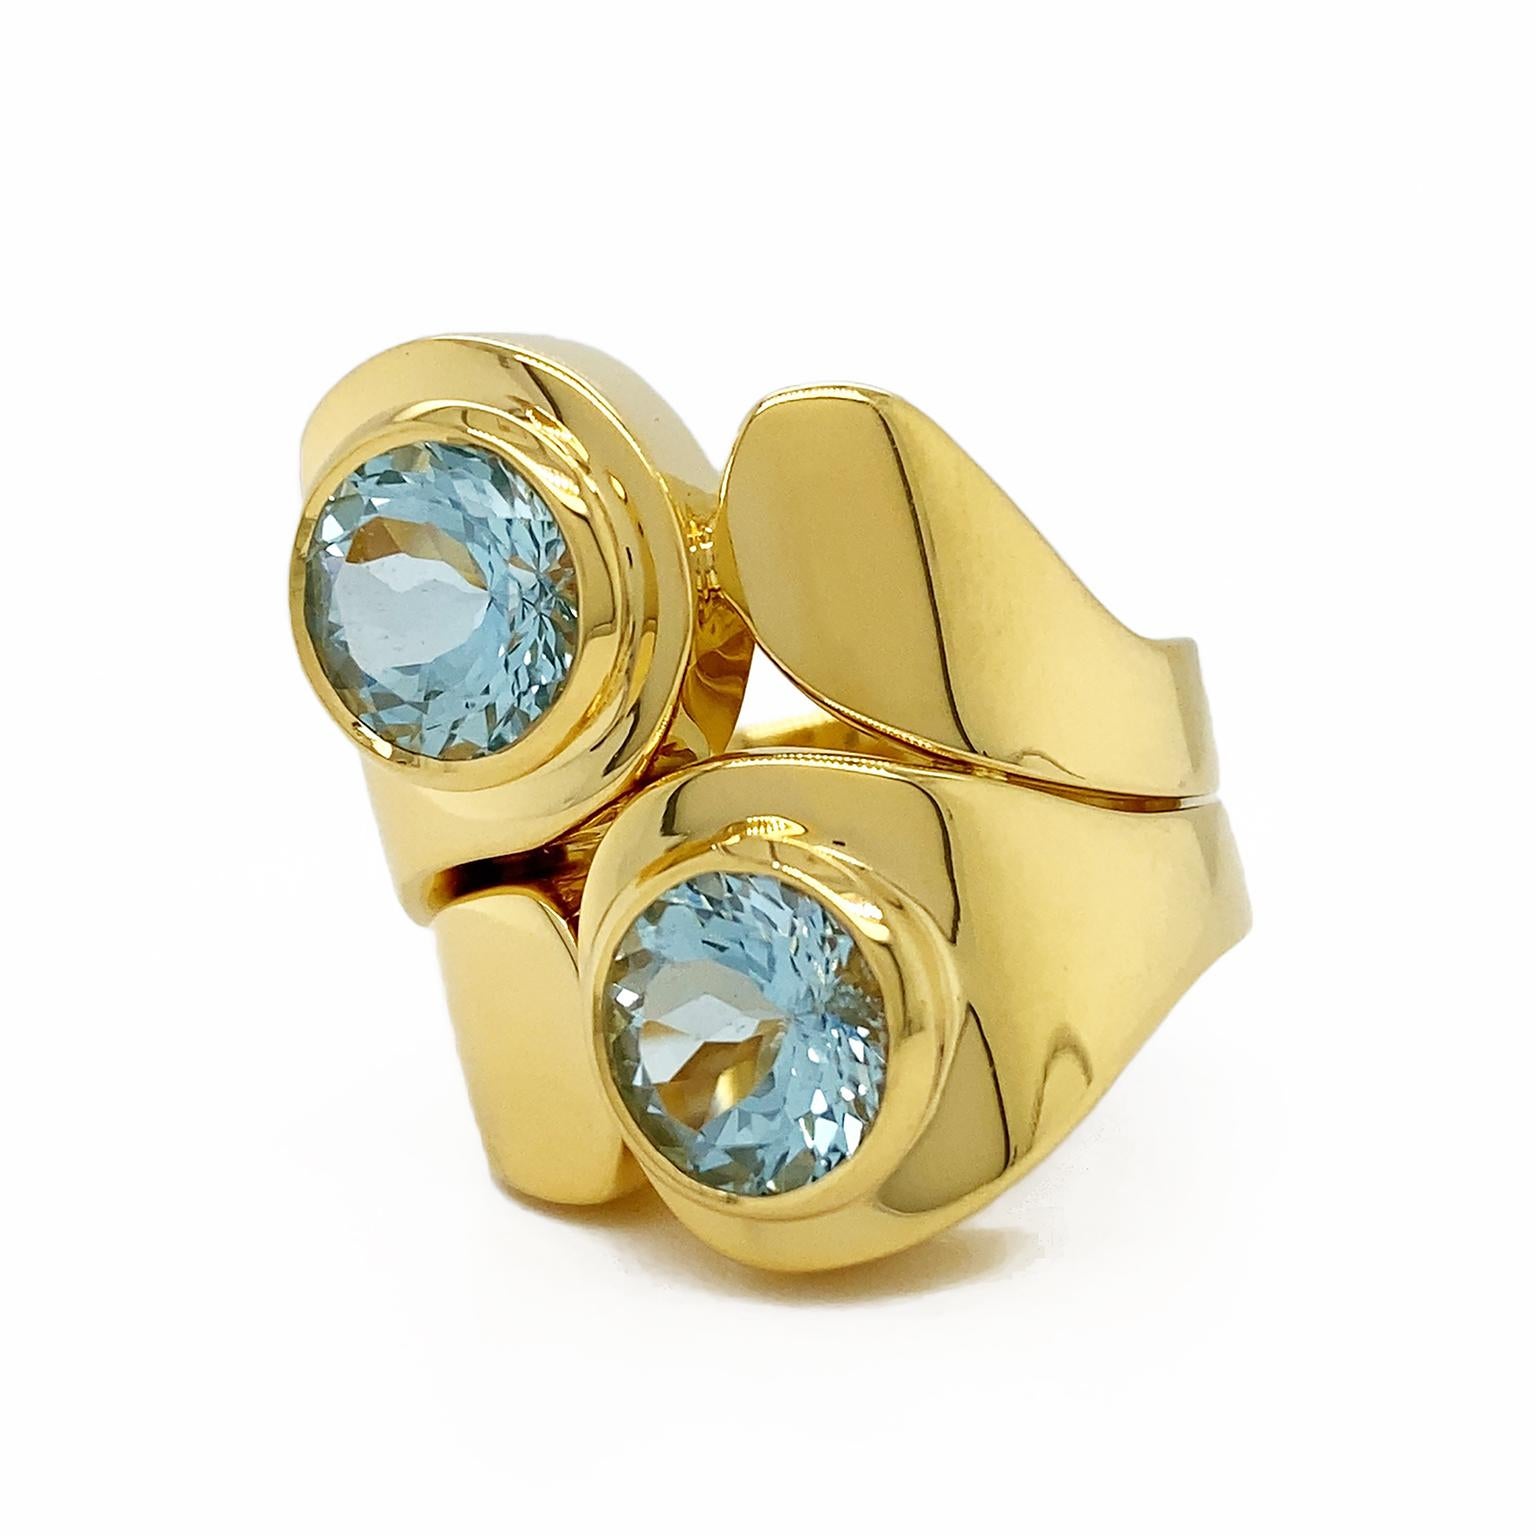 Contrast combines with the coruscating glow of aquamarine. Two tapered 18k yellow gold bands are joined together. As the crowning touch, bezel-set aquamarines are on the broadest ends for a sparkling enhancement. The ring measures 0.87 inches